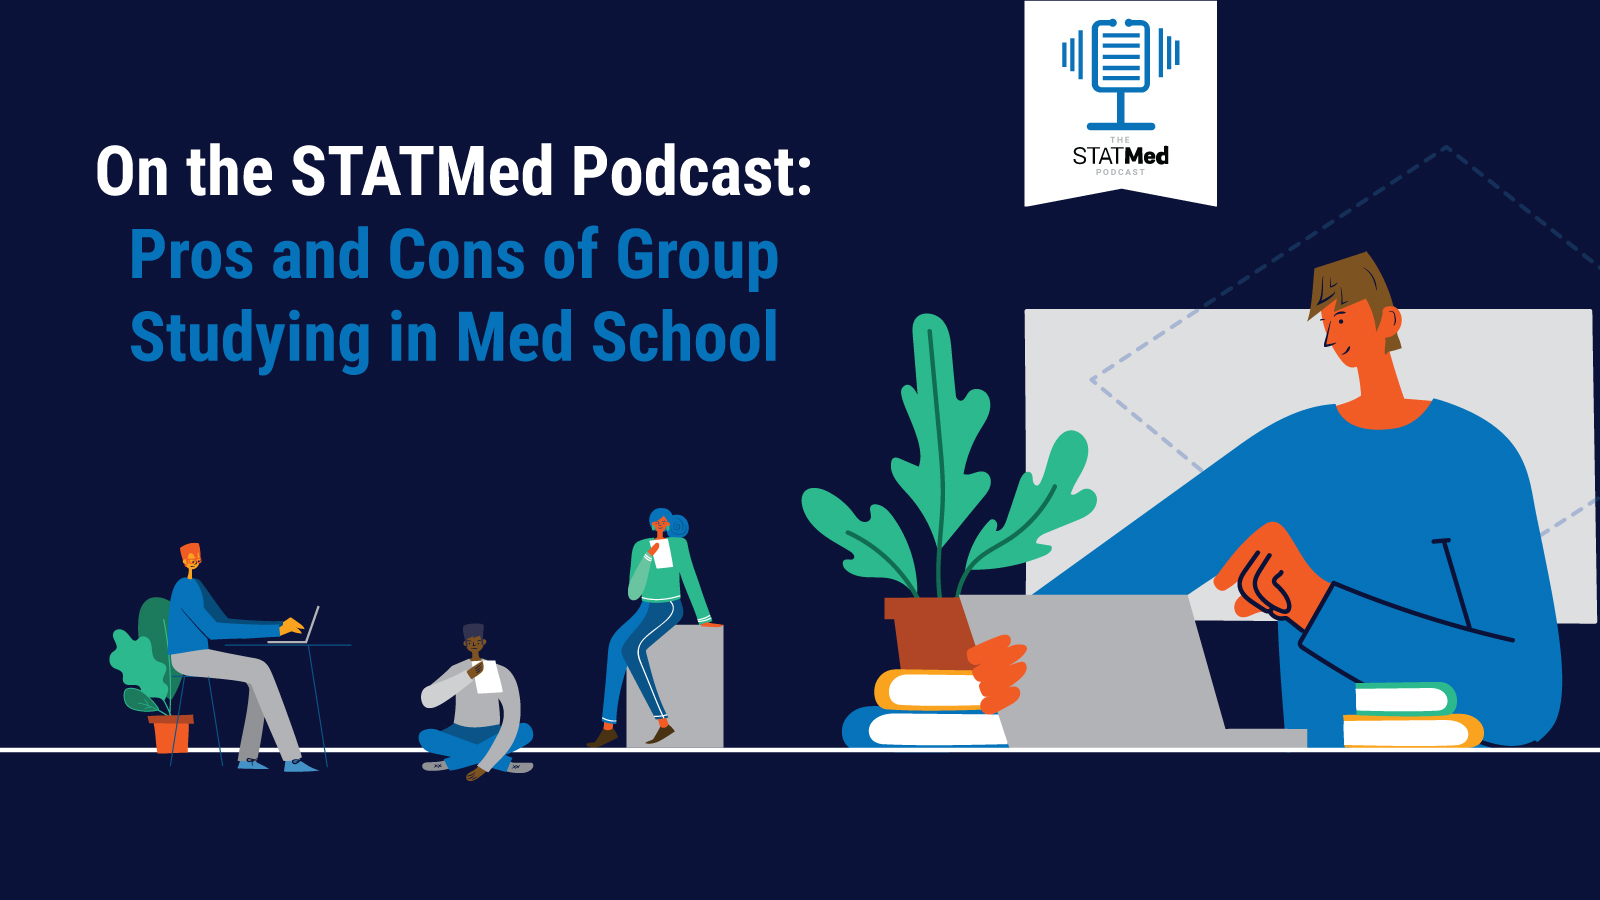 Featured image for “On the STATMed Podcast: Pros and Cons of Group Studying in Med School”